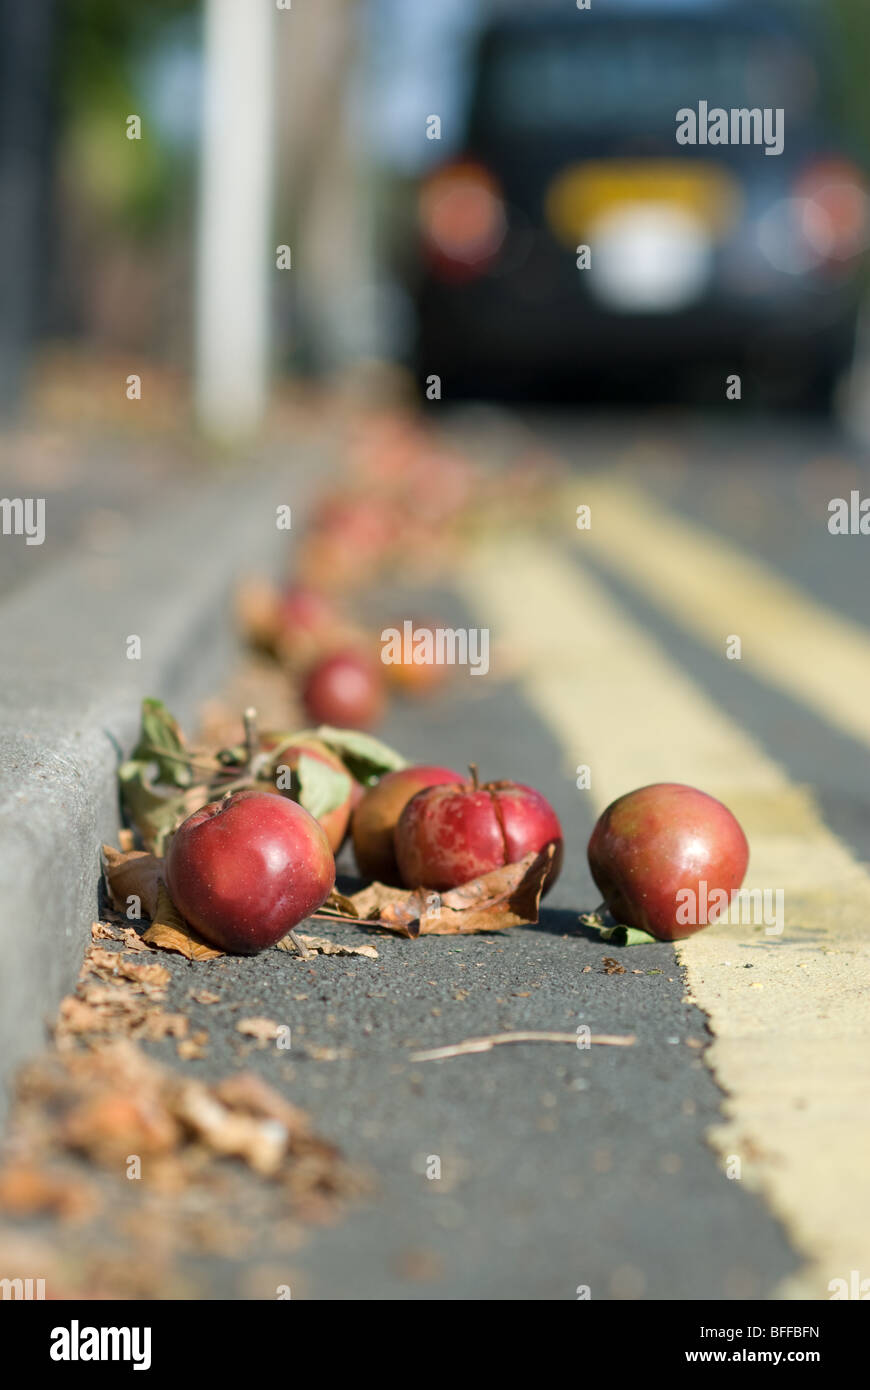 Apples on teh road Stock Photo